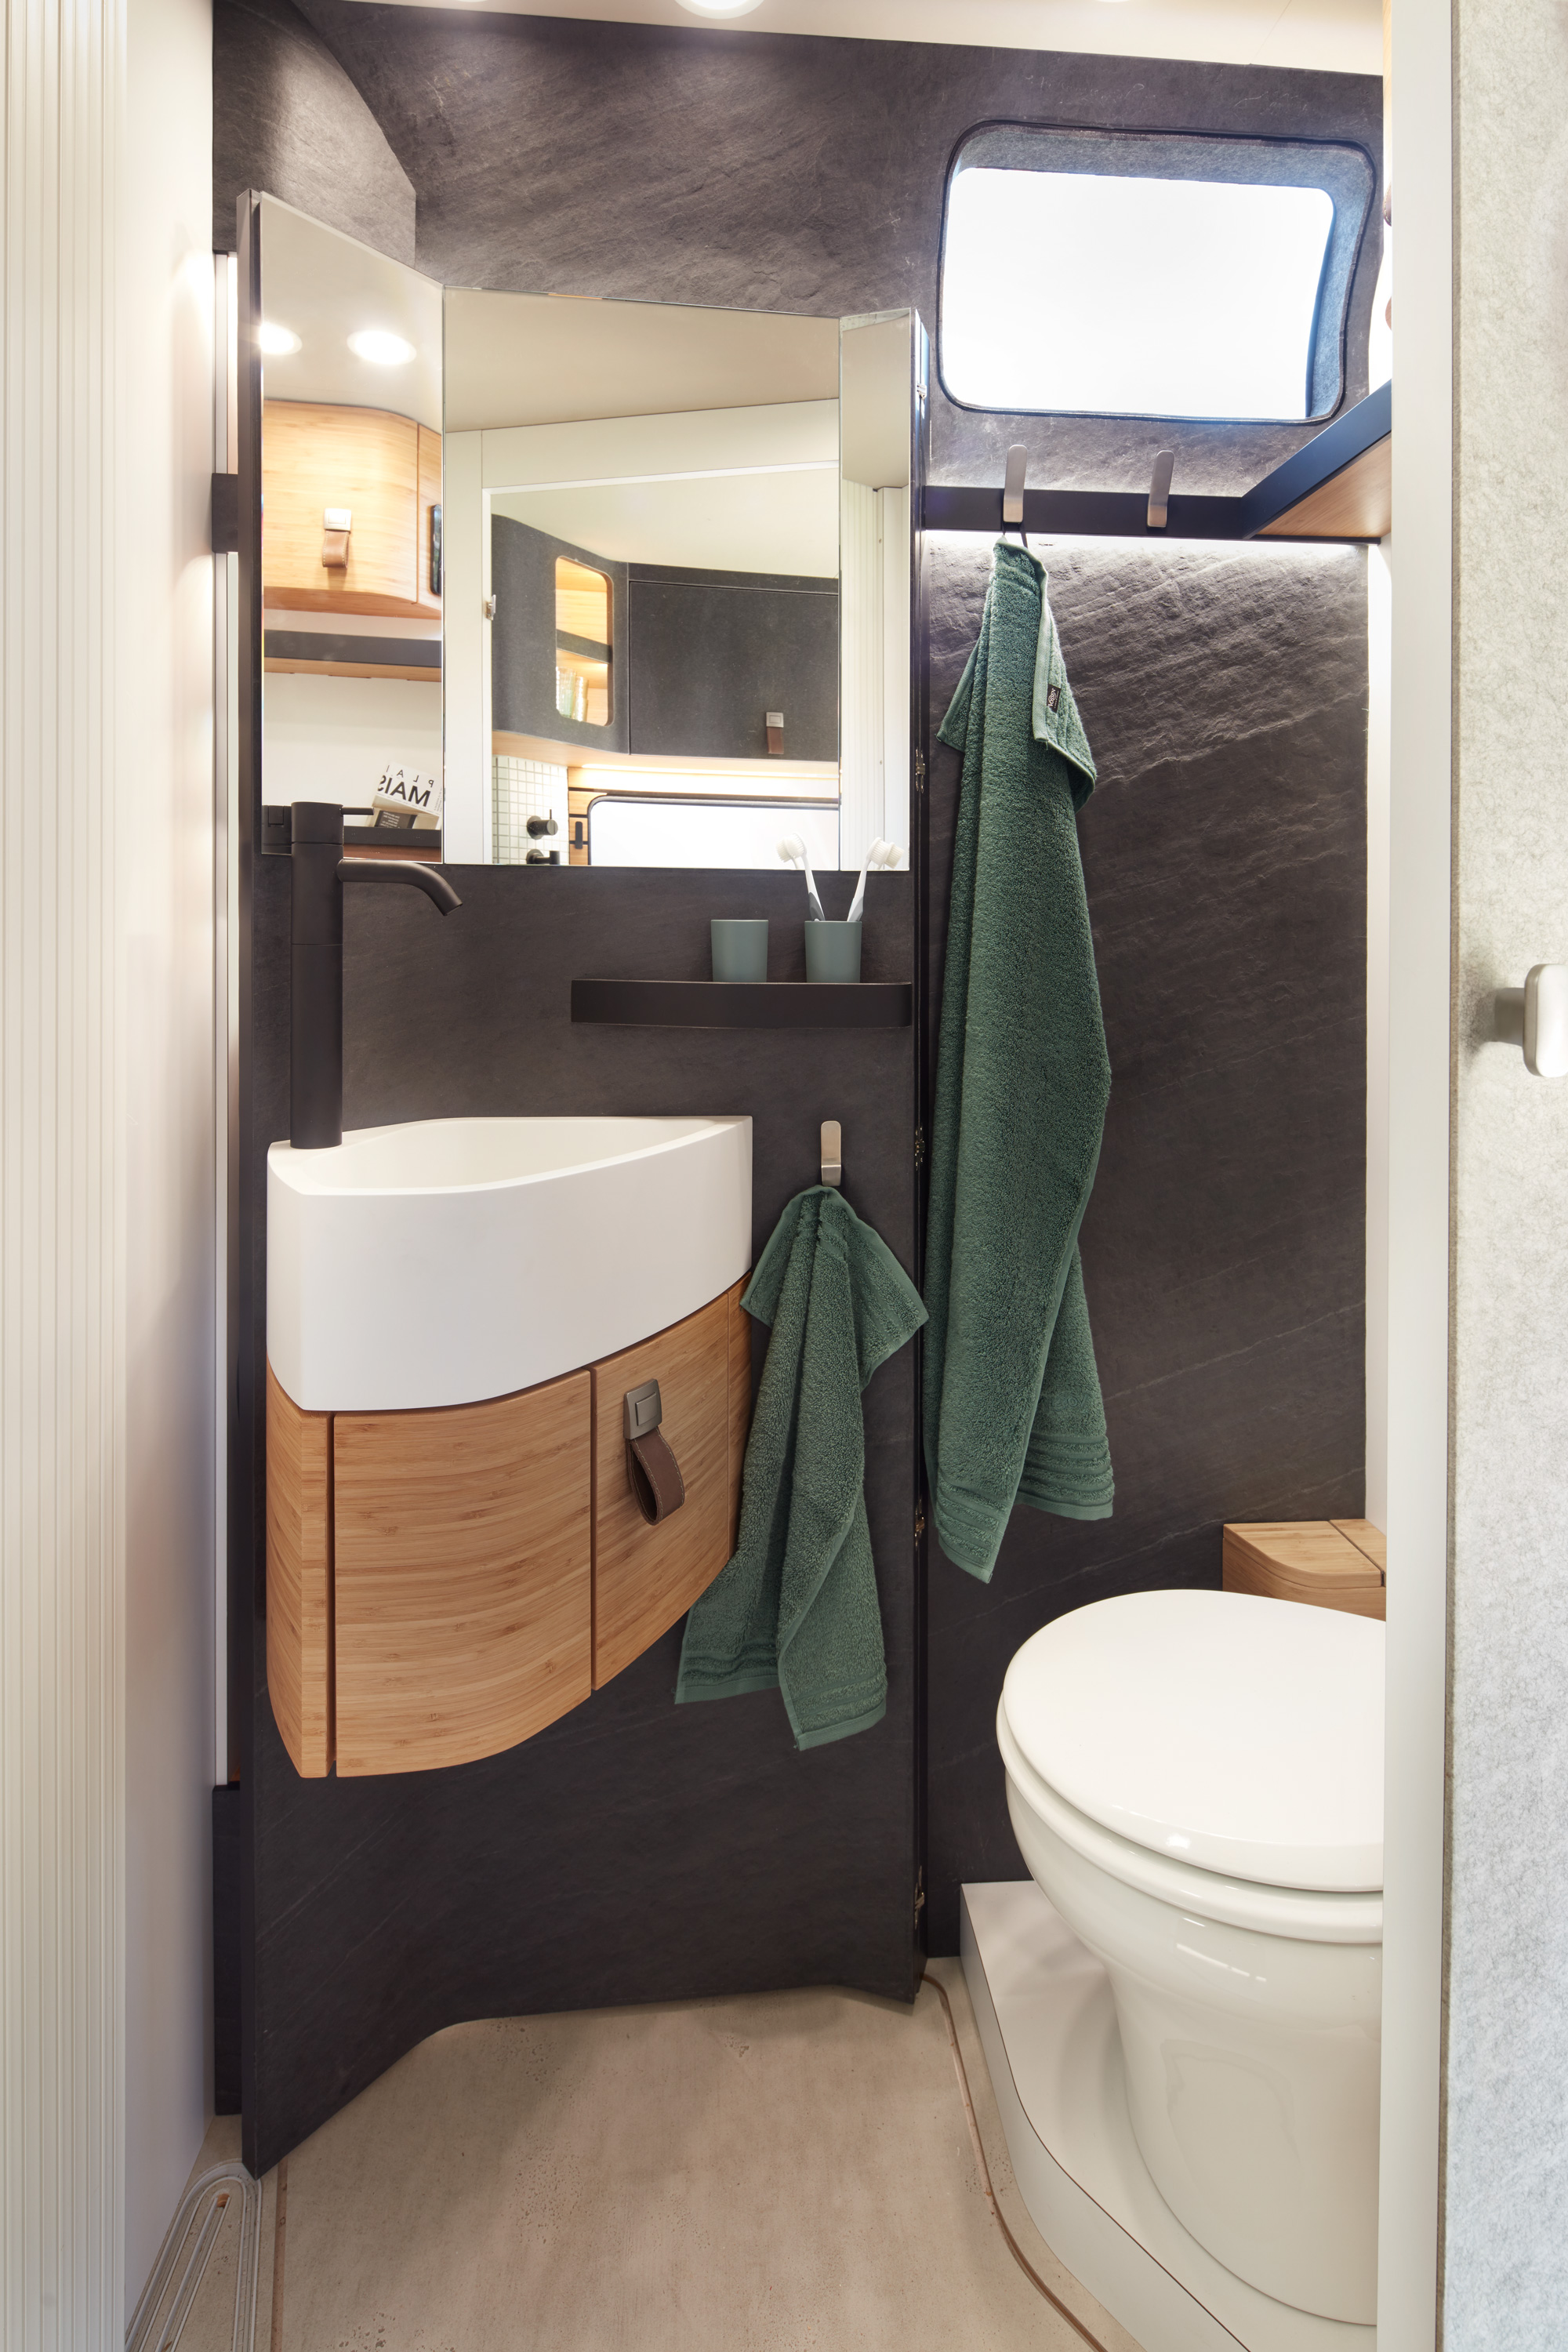 White washbasin and toilet in the realized concept vehicle from HYMER, VisionVenture. The walls are in slate, the furniture in wood.